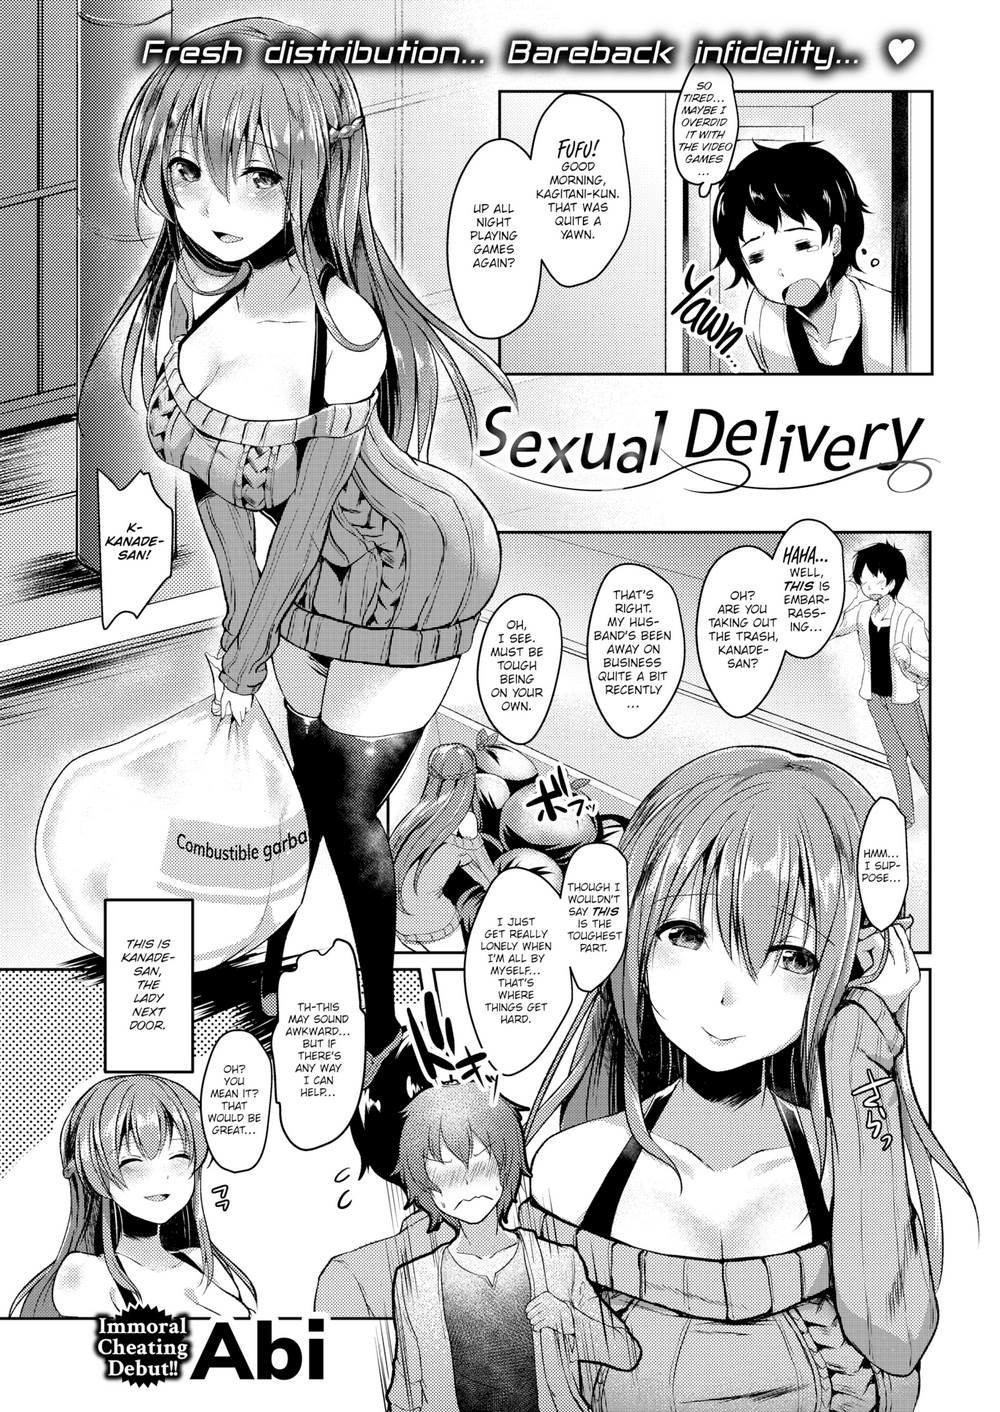 Sexual Delivery - 0